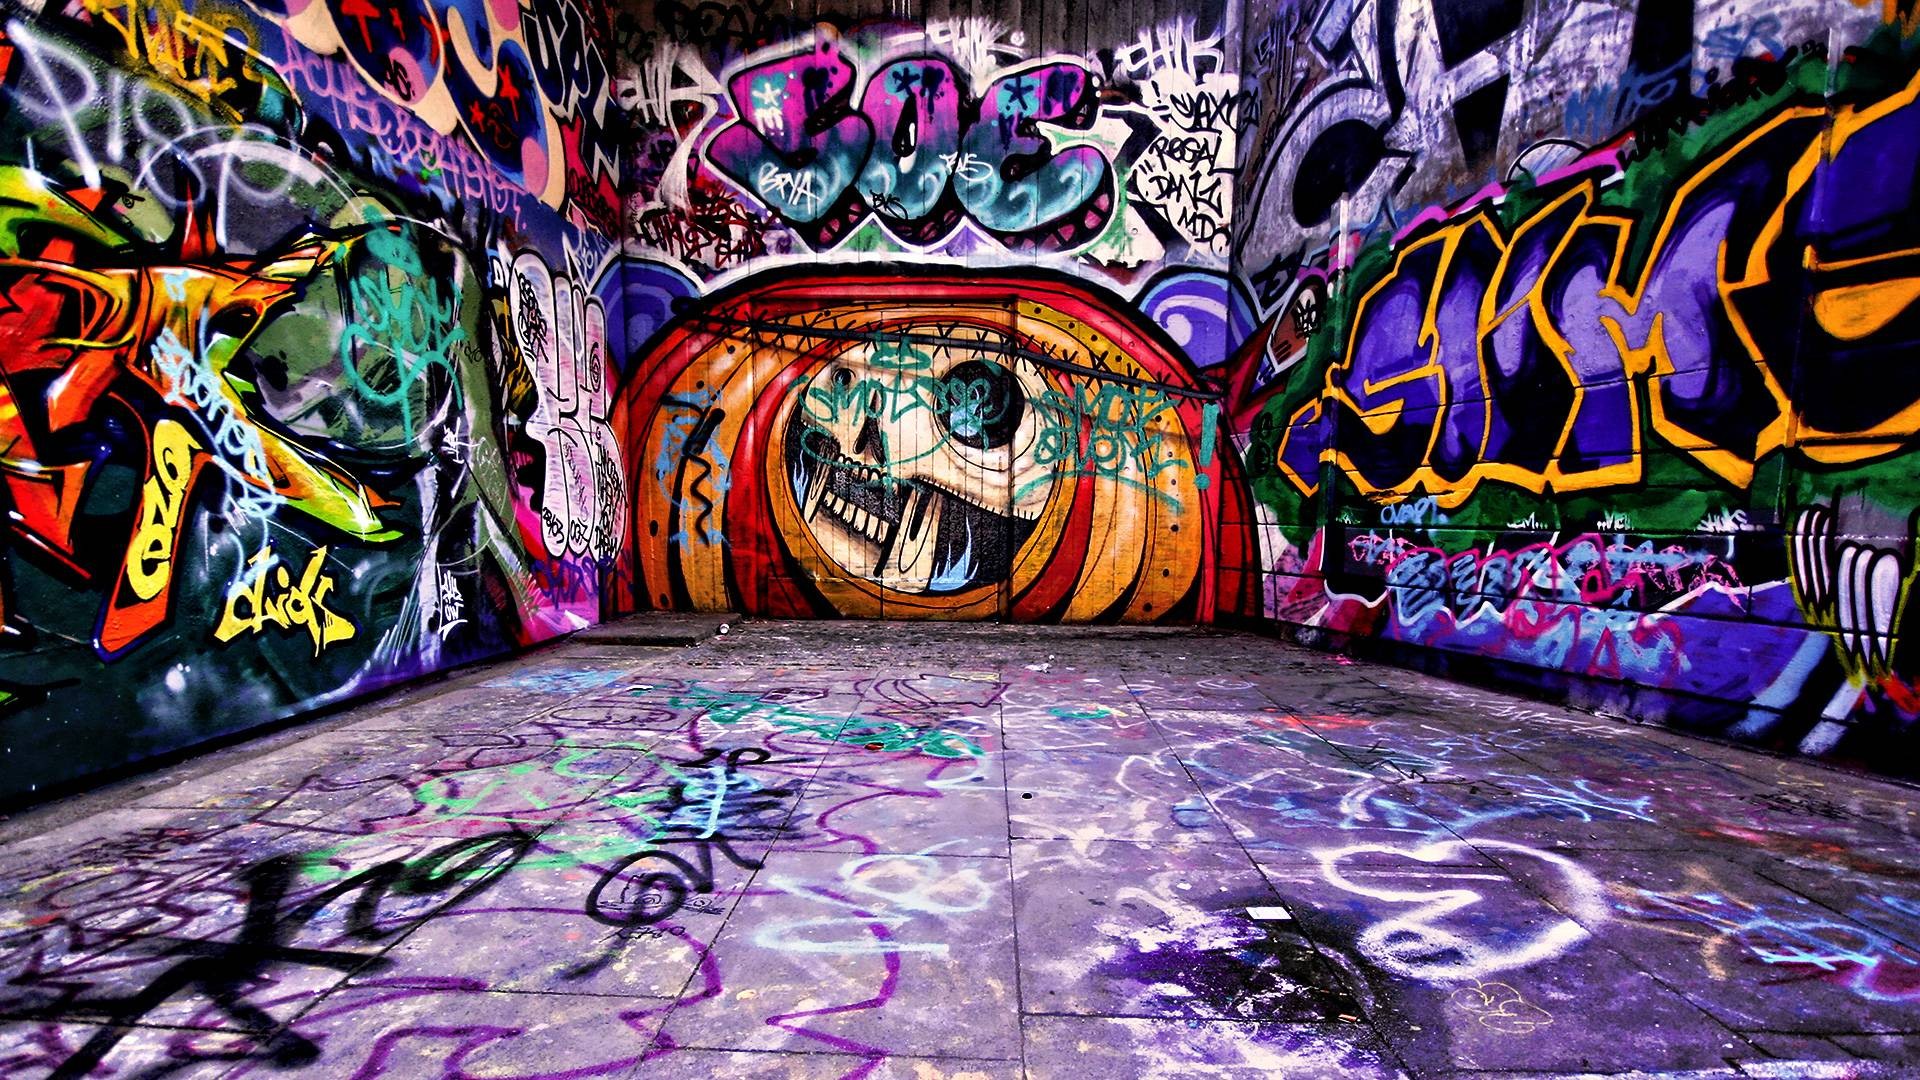 Street Art Desktop Backgrounds HD with resolution 1920X1080 pixel. You can use this wallpaper as background for your desktop Computer Screensavers, Android or iPhone smartphones